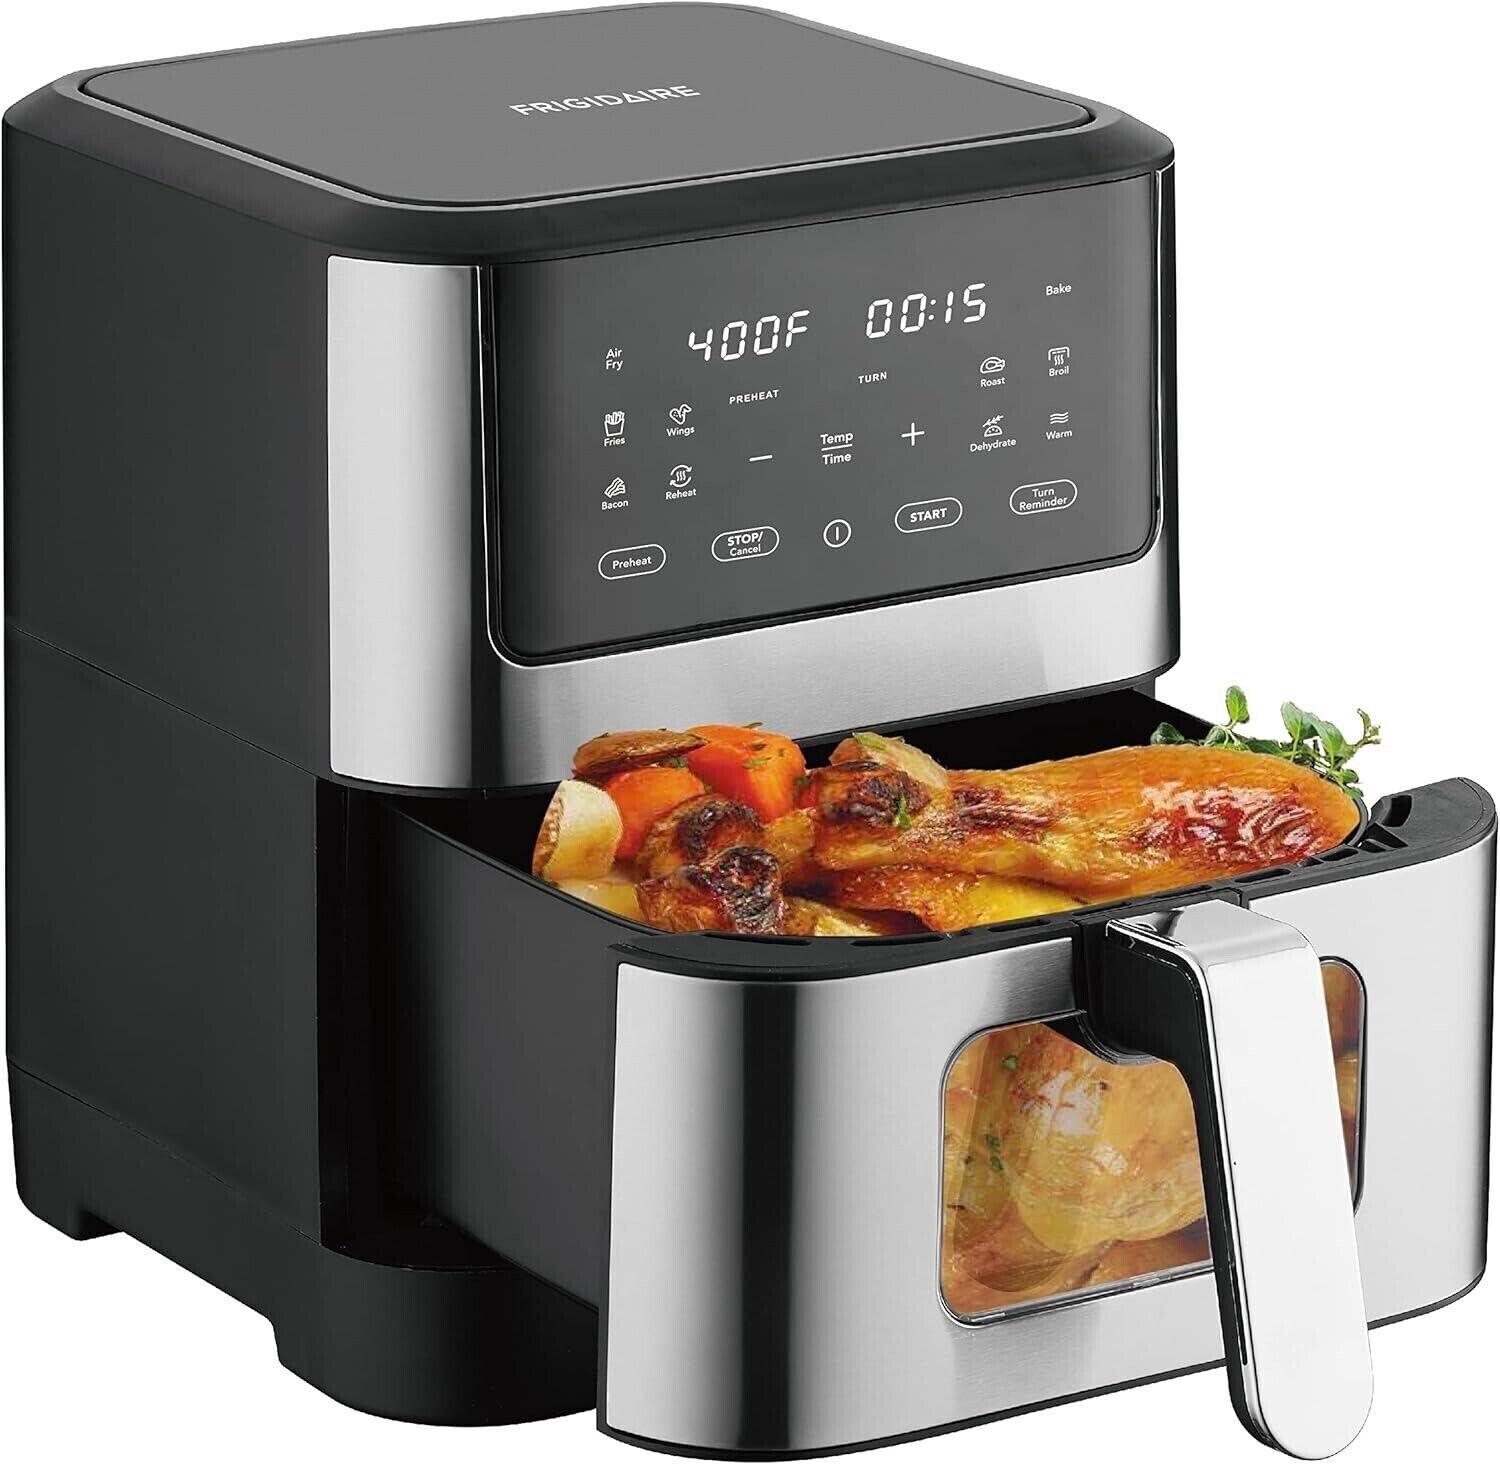 Frigidaire Digital Air Fryer Stainless Steel With Viewing Window, 8.5 Quart new